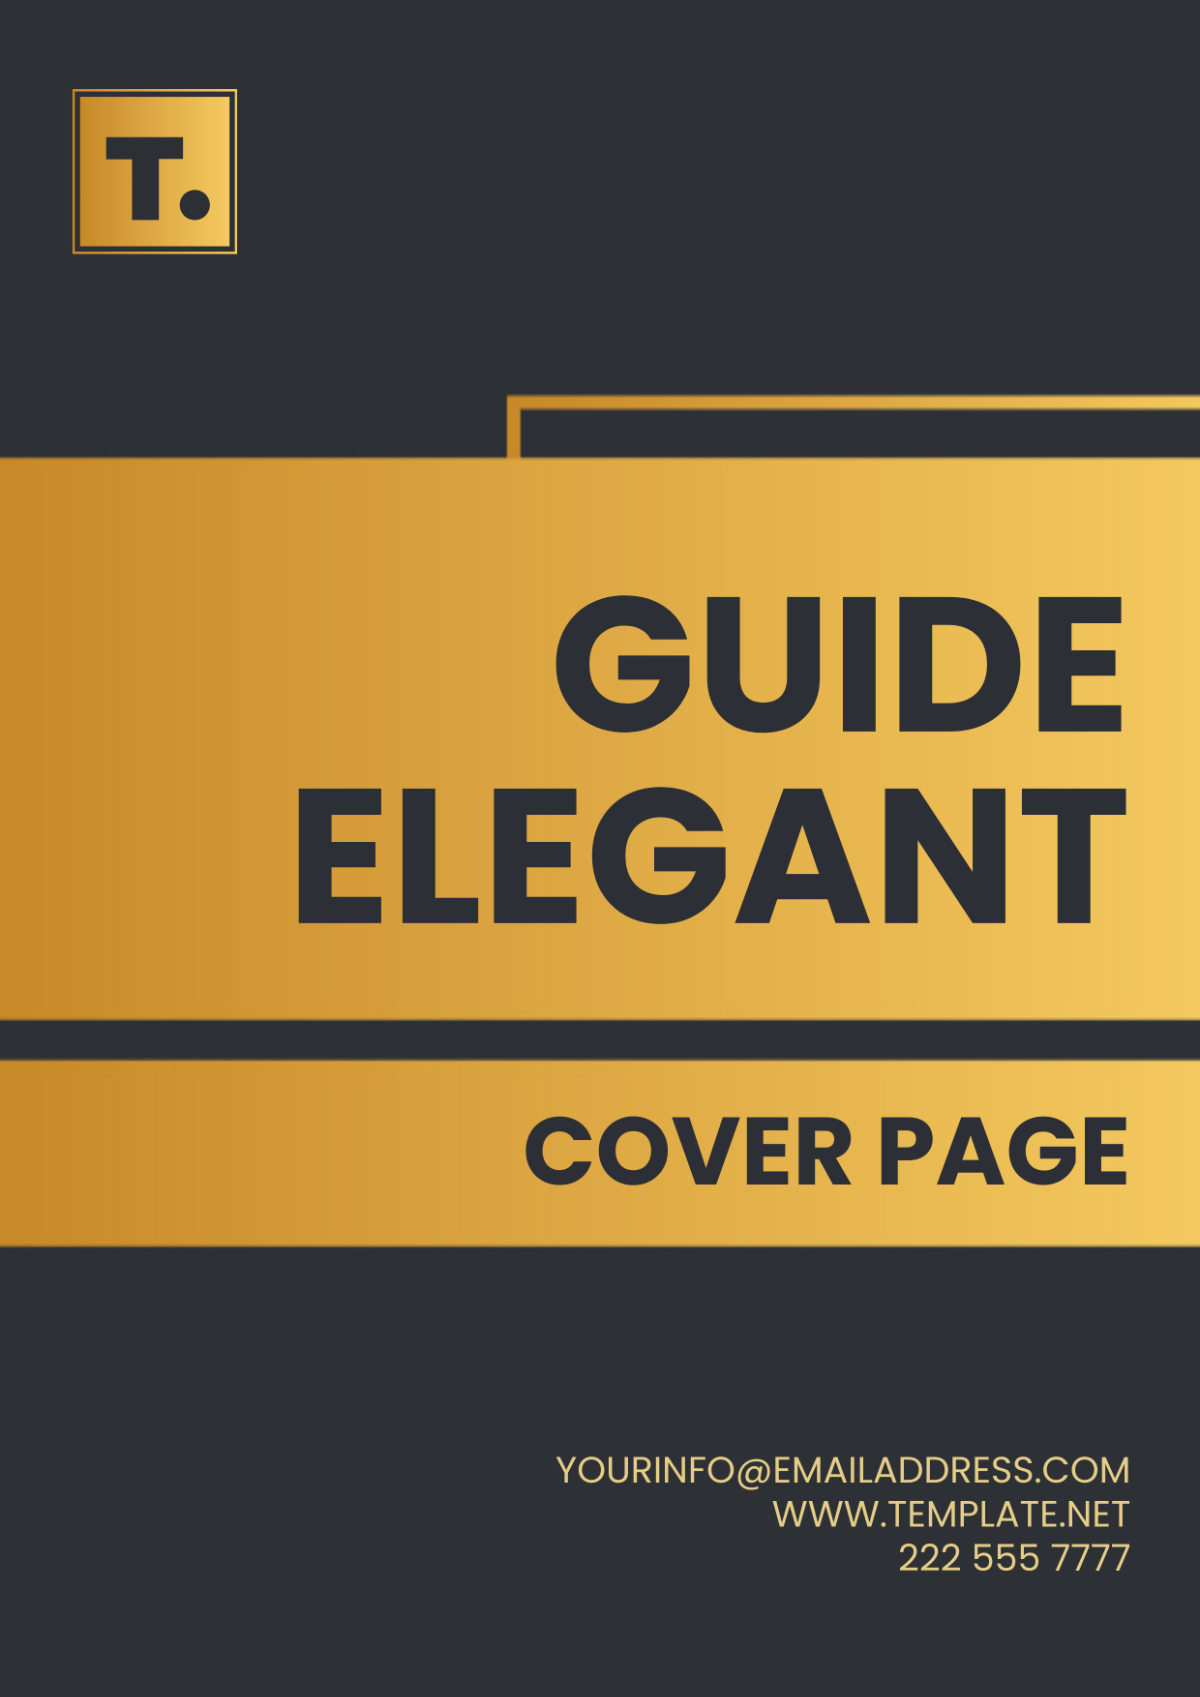 Free Guide Elegant Cover Page Template